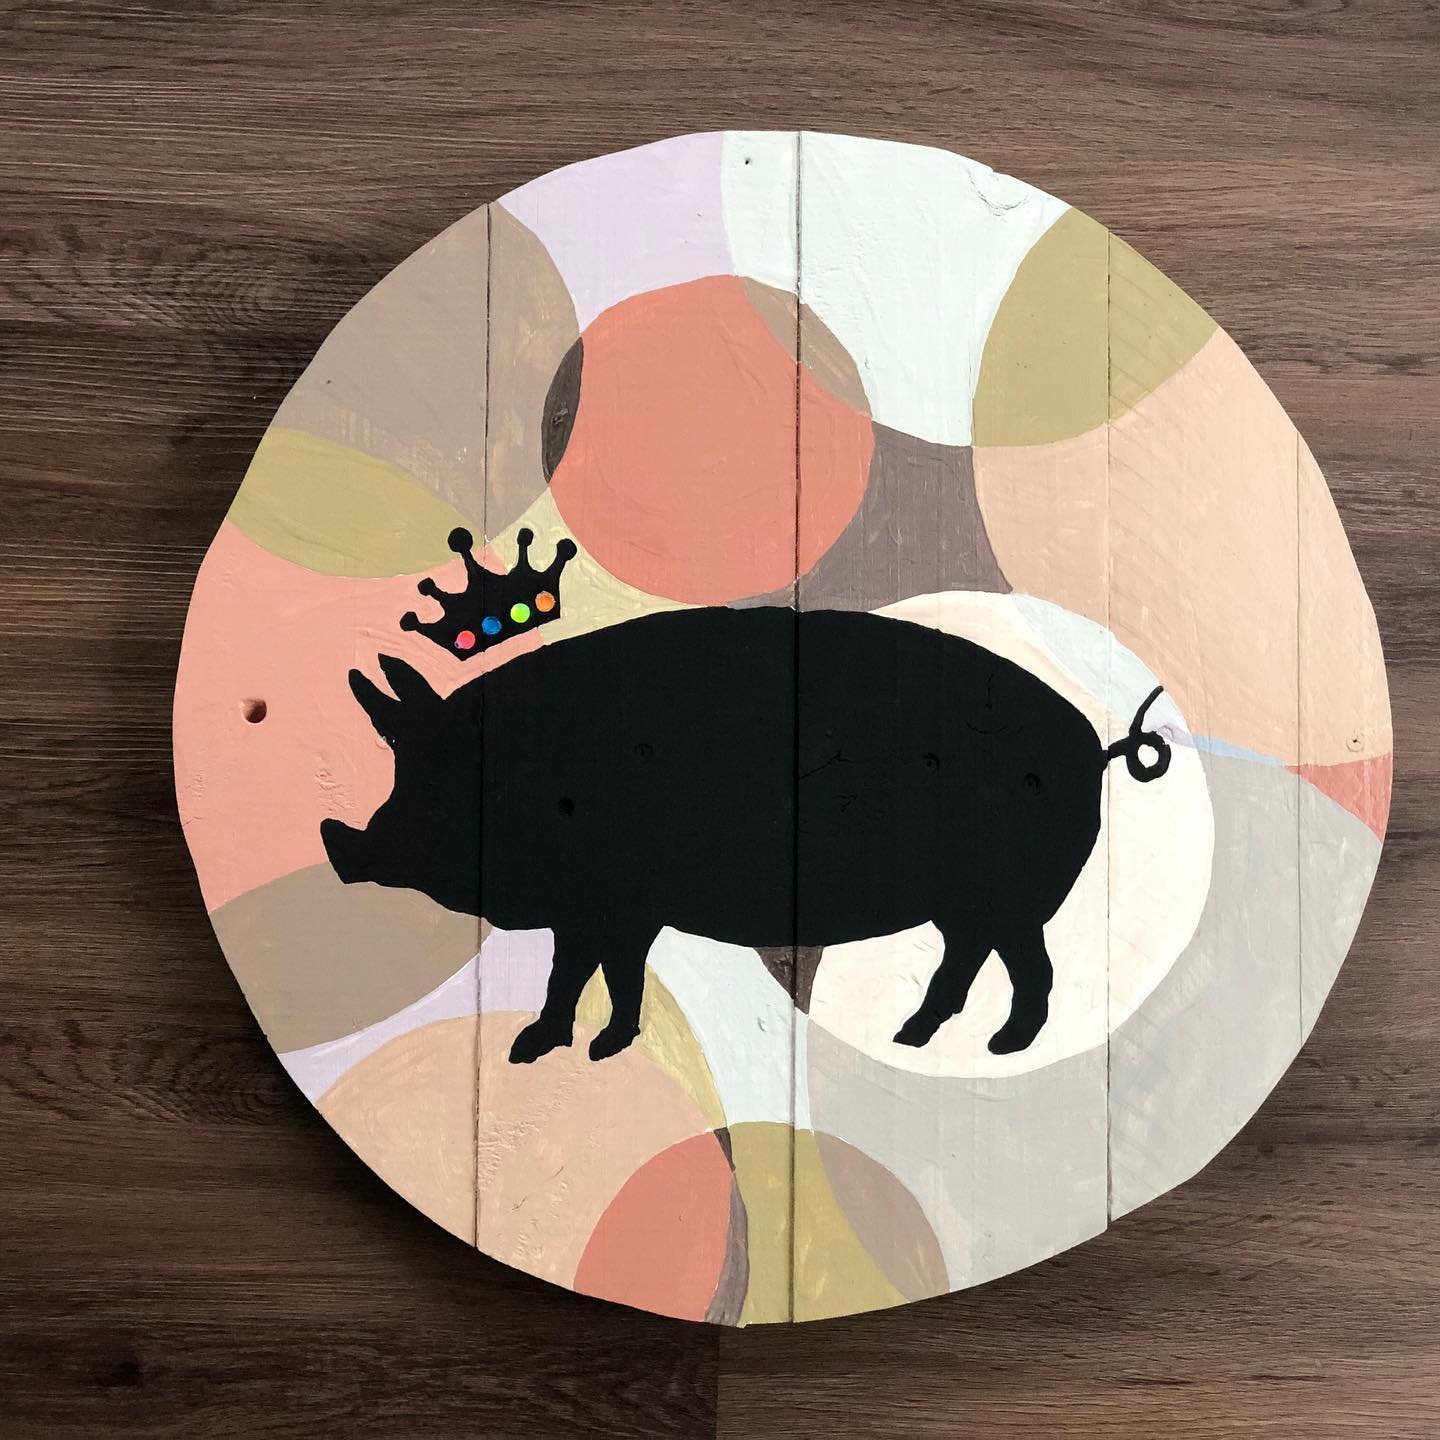 Another fun #commission project: Piggy Prince Porker! Check out the #sequins on the crown👑 #commissionedart #pigart #acrylicpaint on #reclaimedwood #art #peaceofart